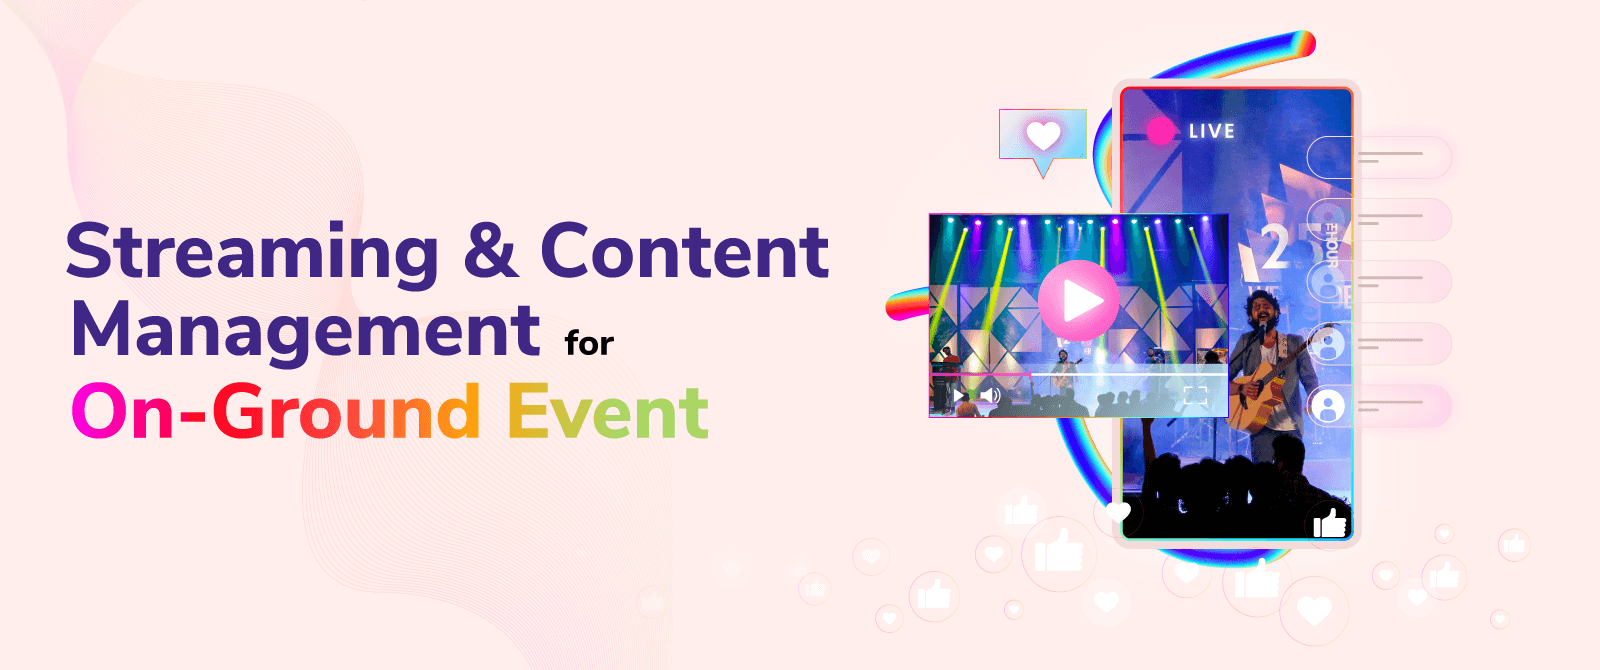 Streaming & Content Management for On-Ground Event